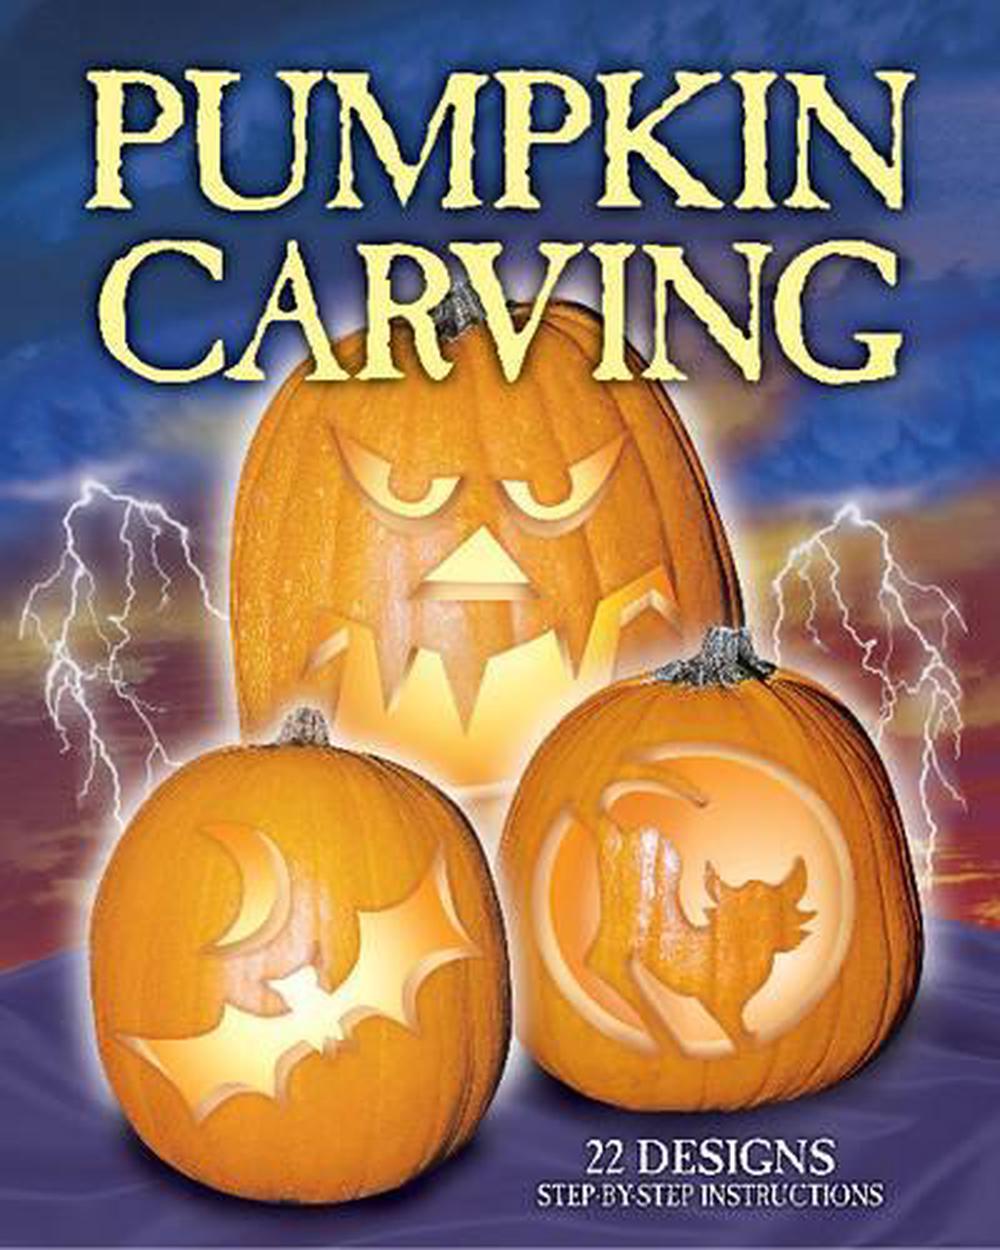 Pumpkin Carving by Lone Pine Publishing (English) Paperback Book Free ...